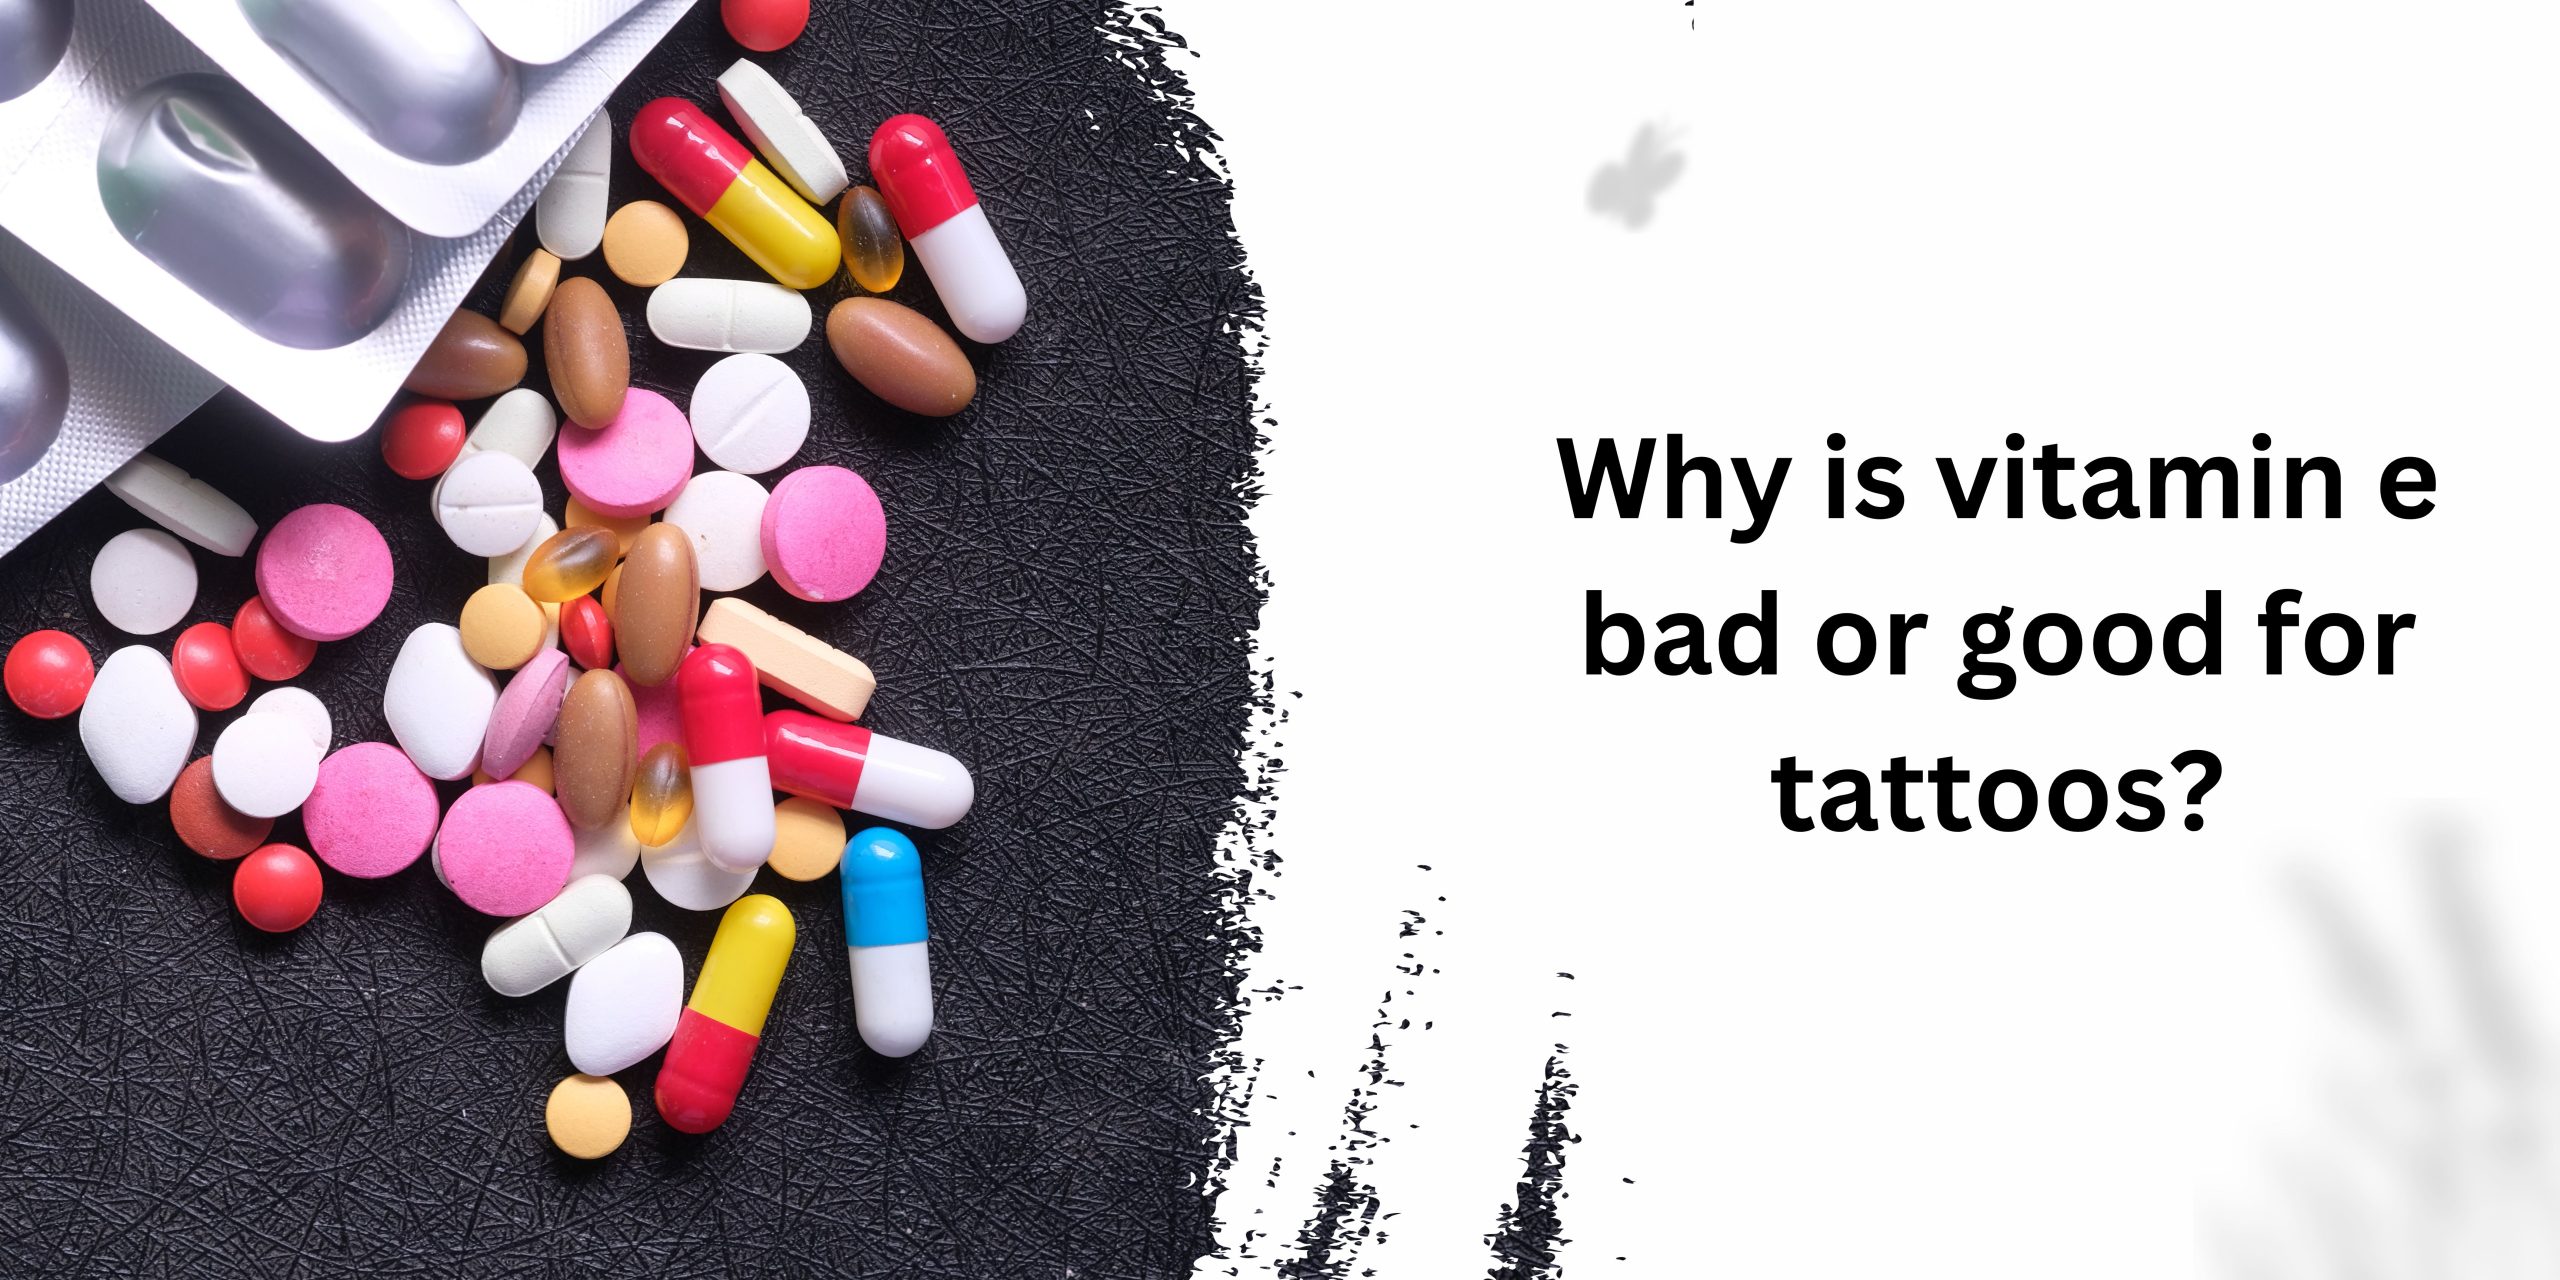 Why is vitamin e bad or good for tattoos